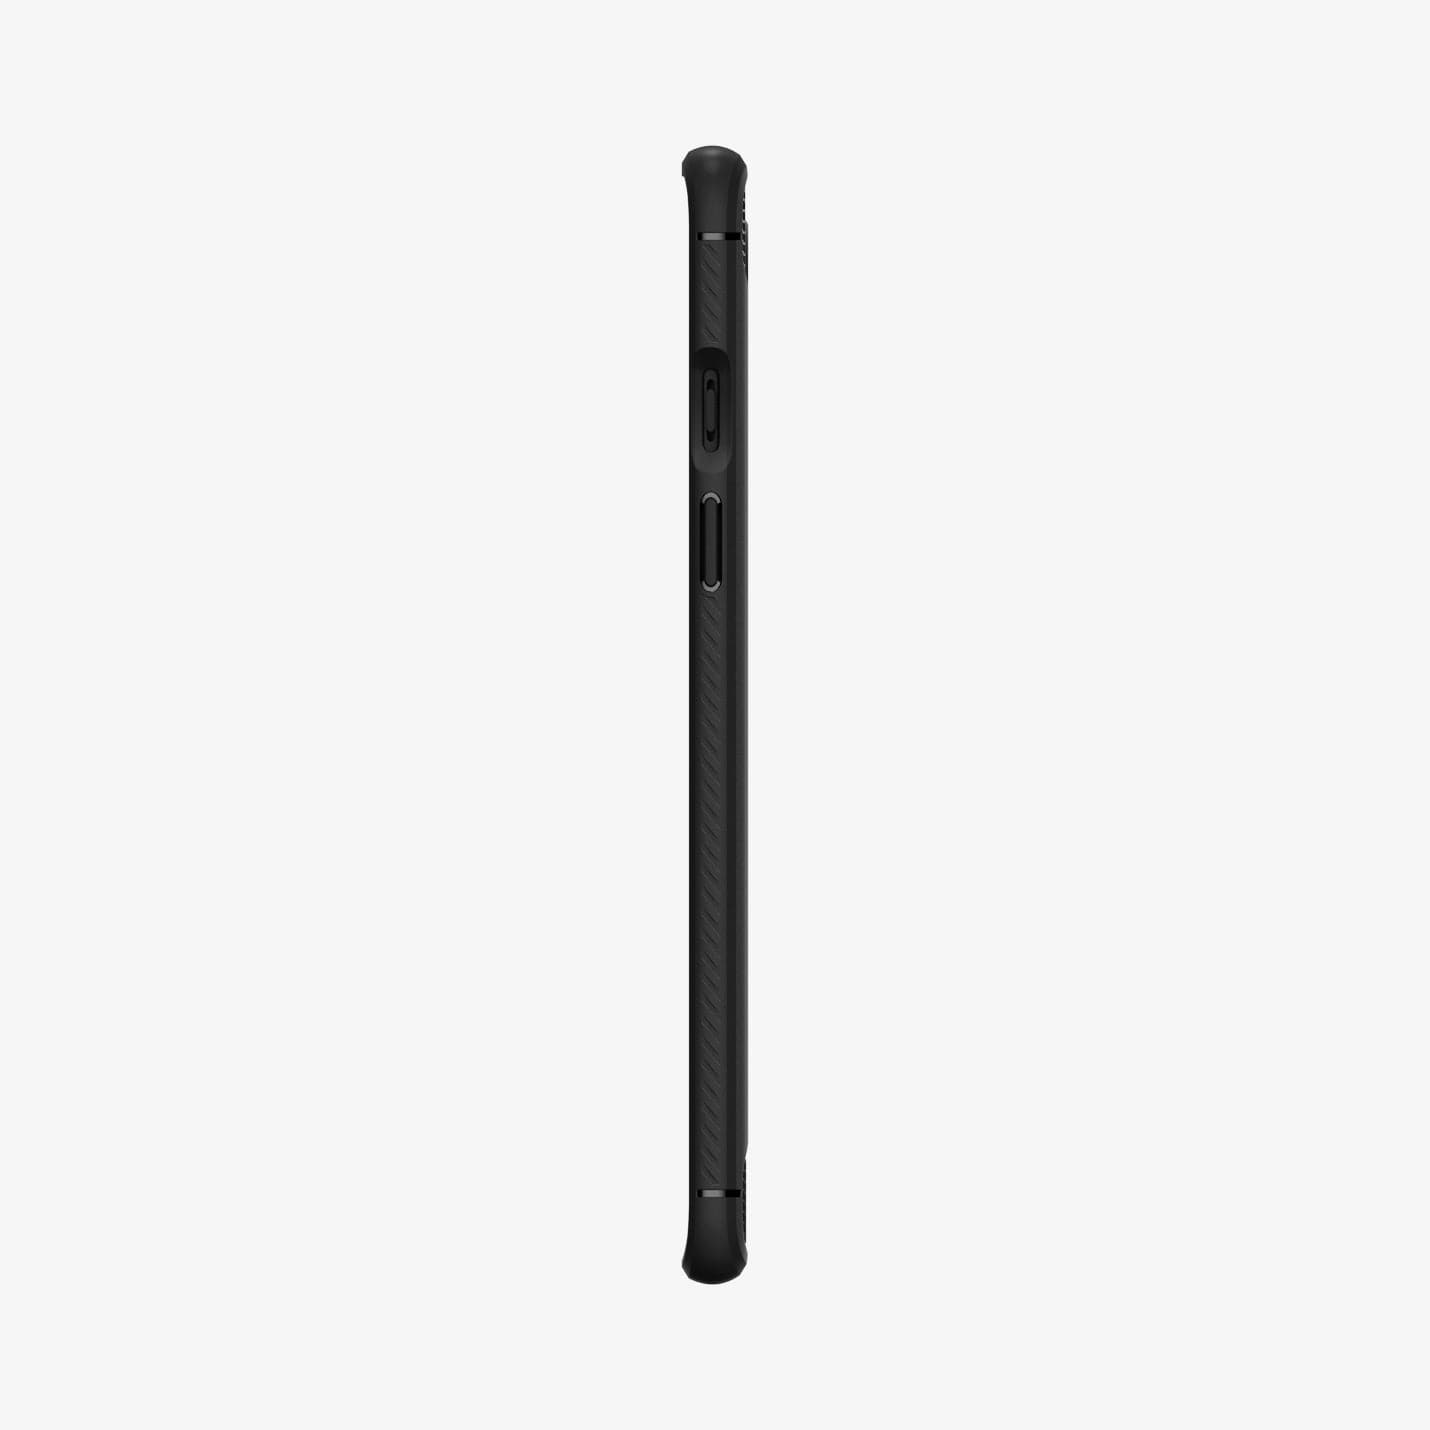 ACS00826 - OnePlus 8 Rugged Armor Case in Matte Black showing the side